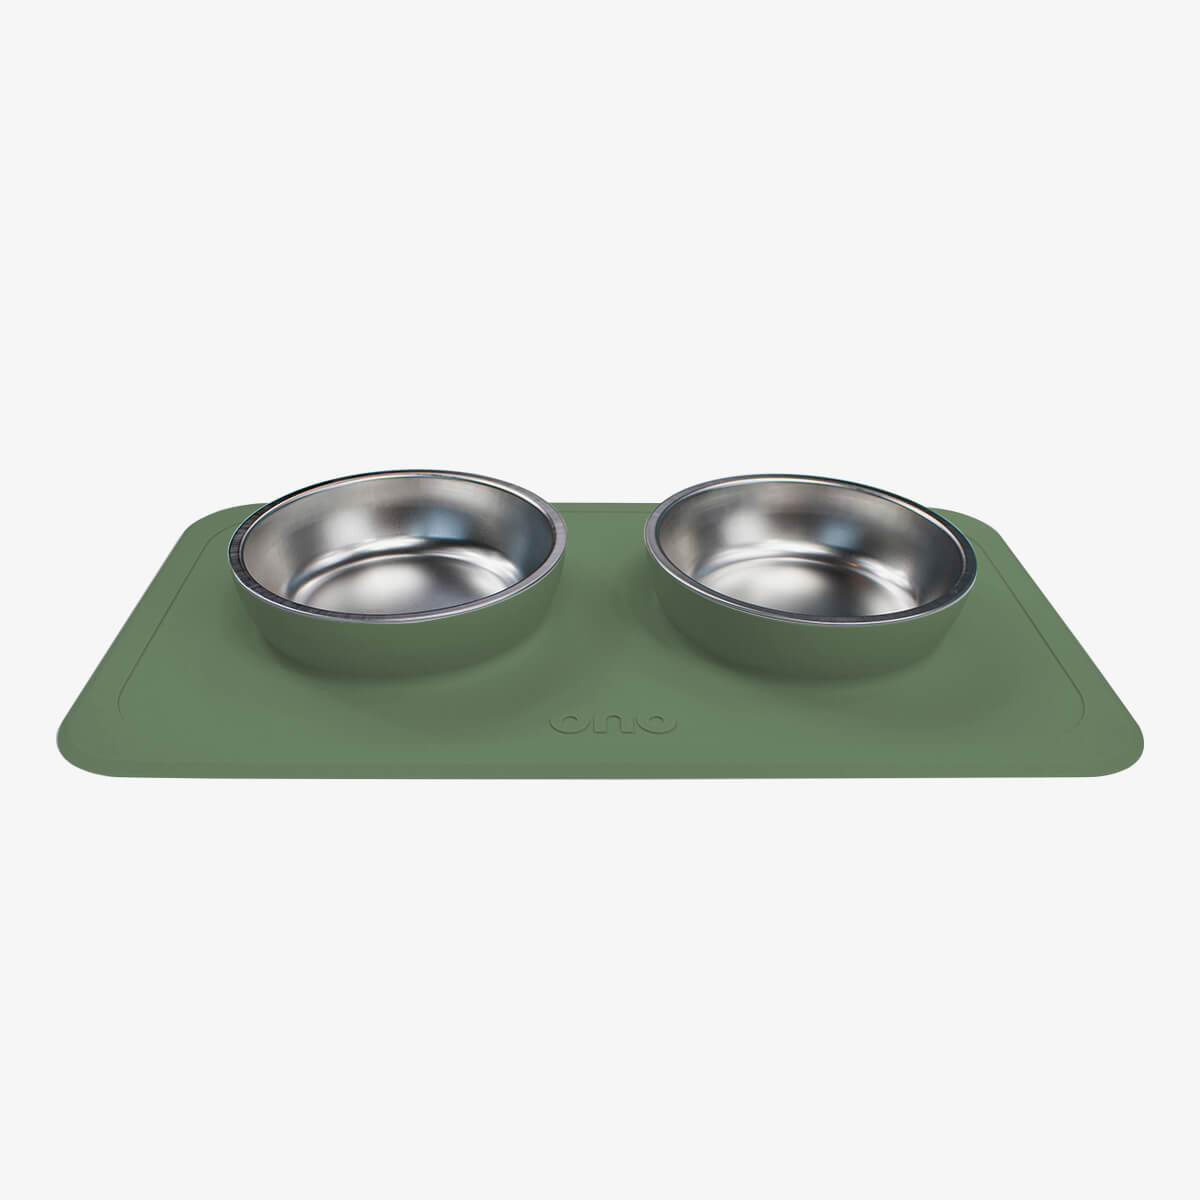 The Good Bowl (16 oz Double) in Olive by Ono Pet Products